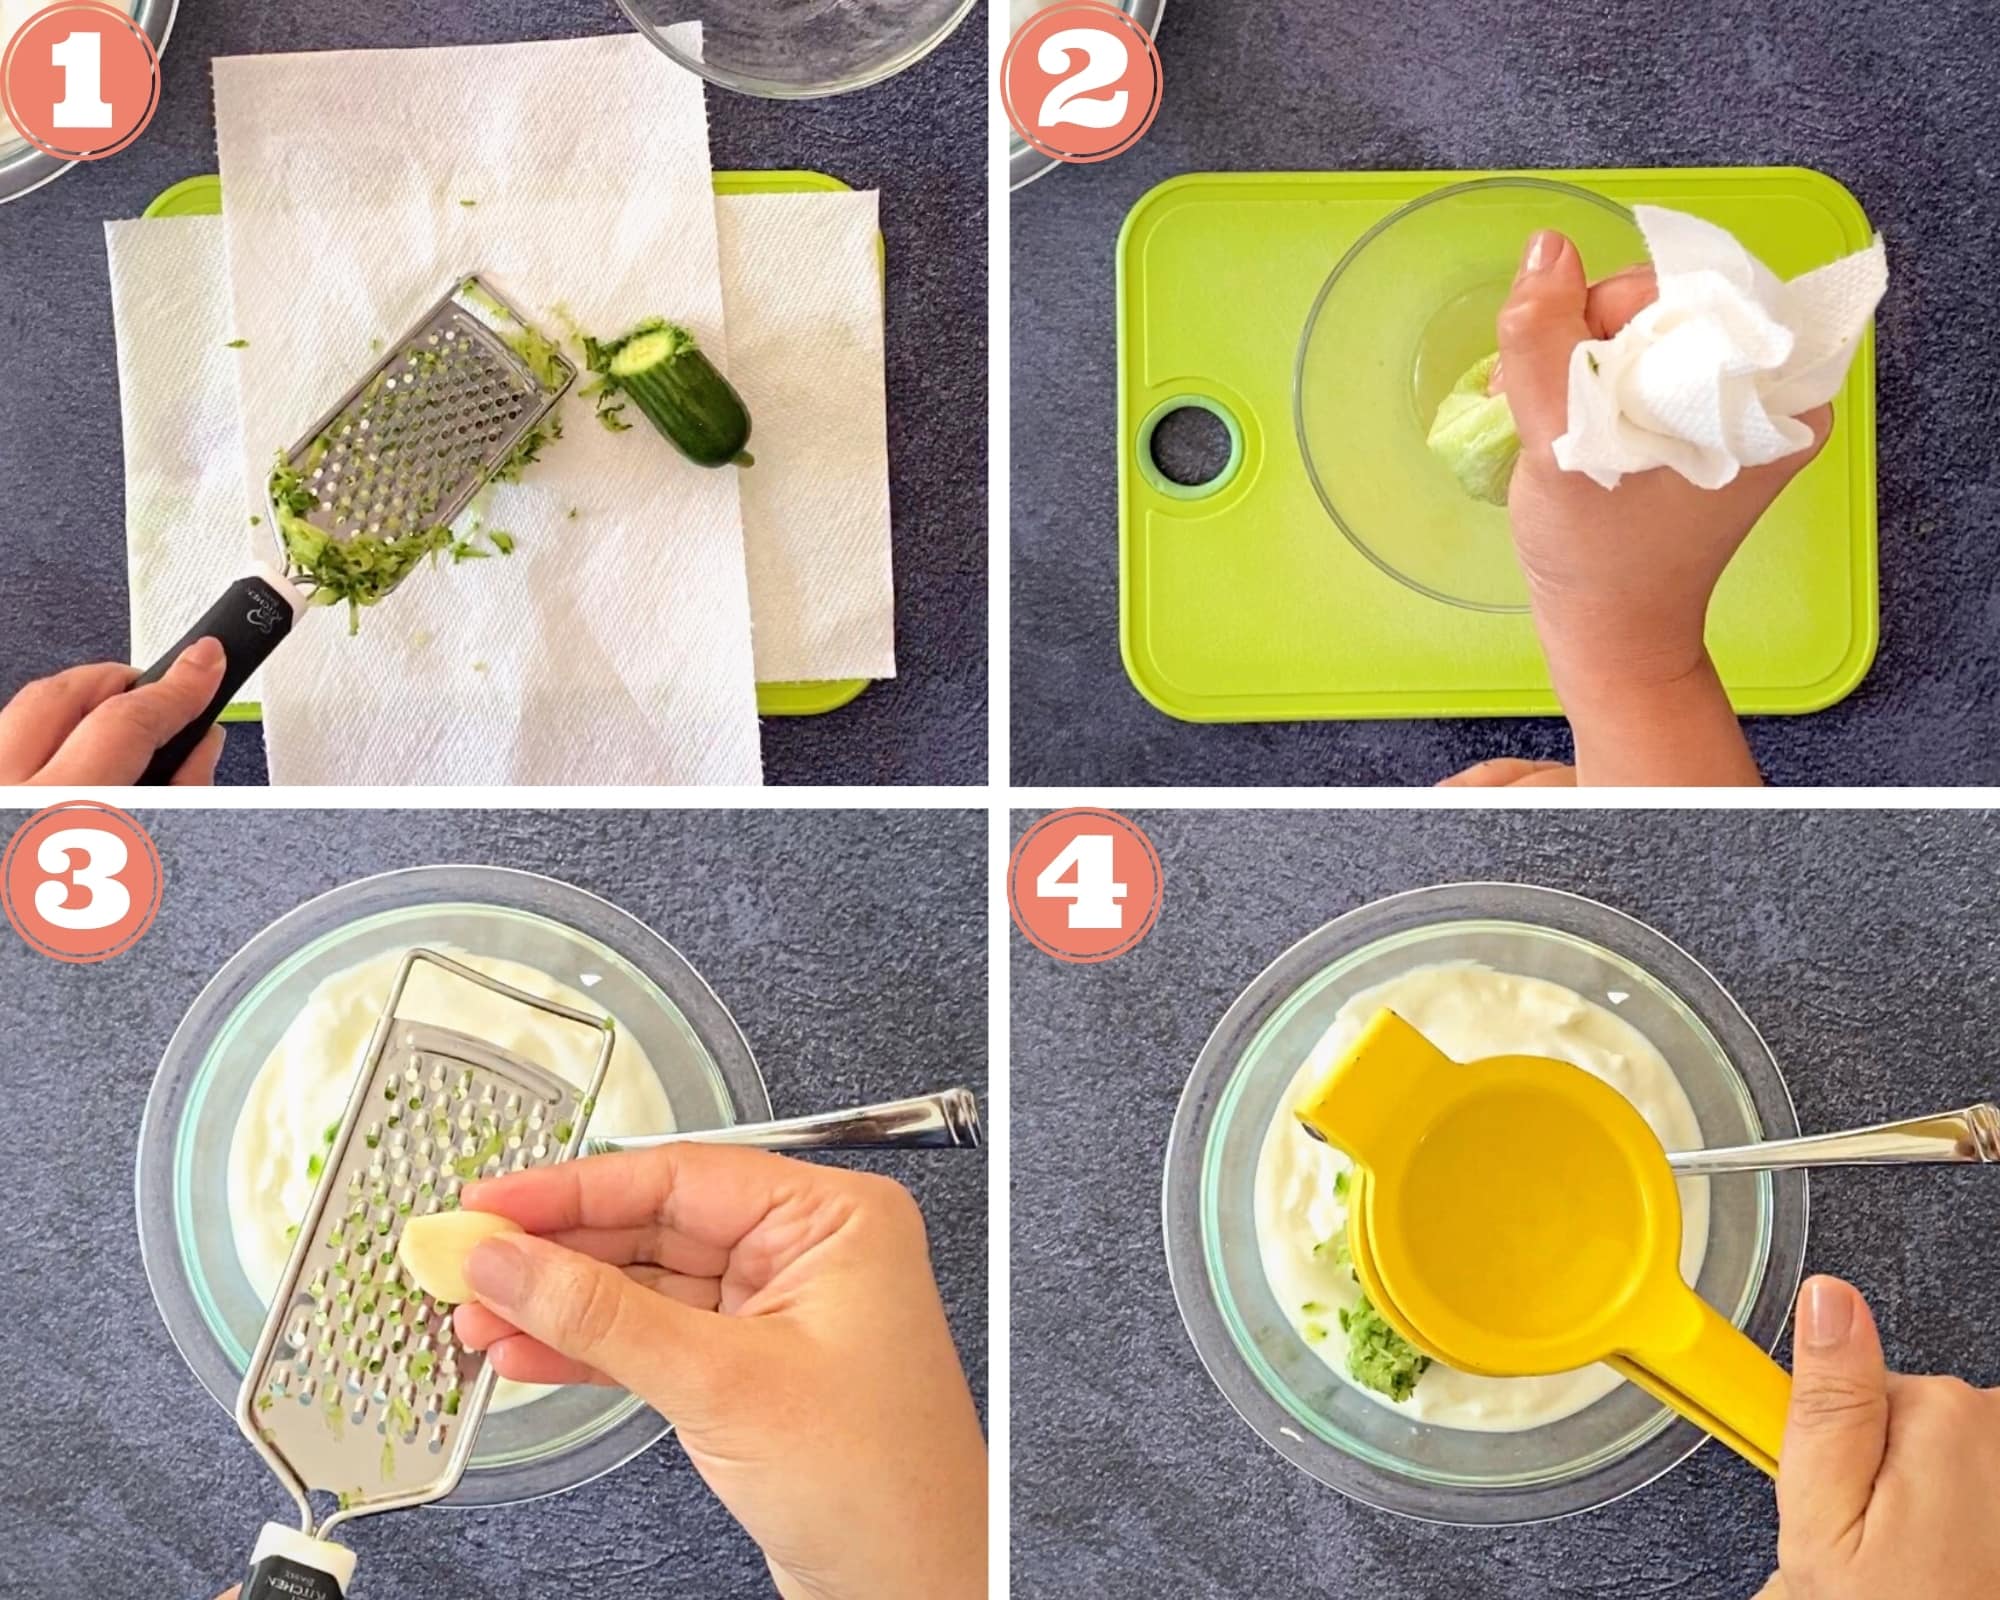 four steps showing grating cucumber, squeezing it, grating garlic and pressing lemon squeezer